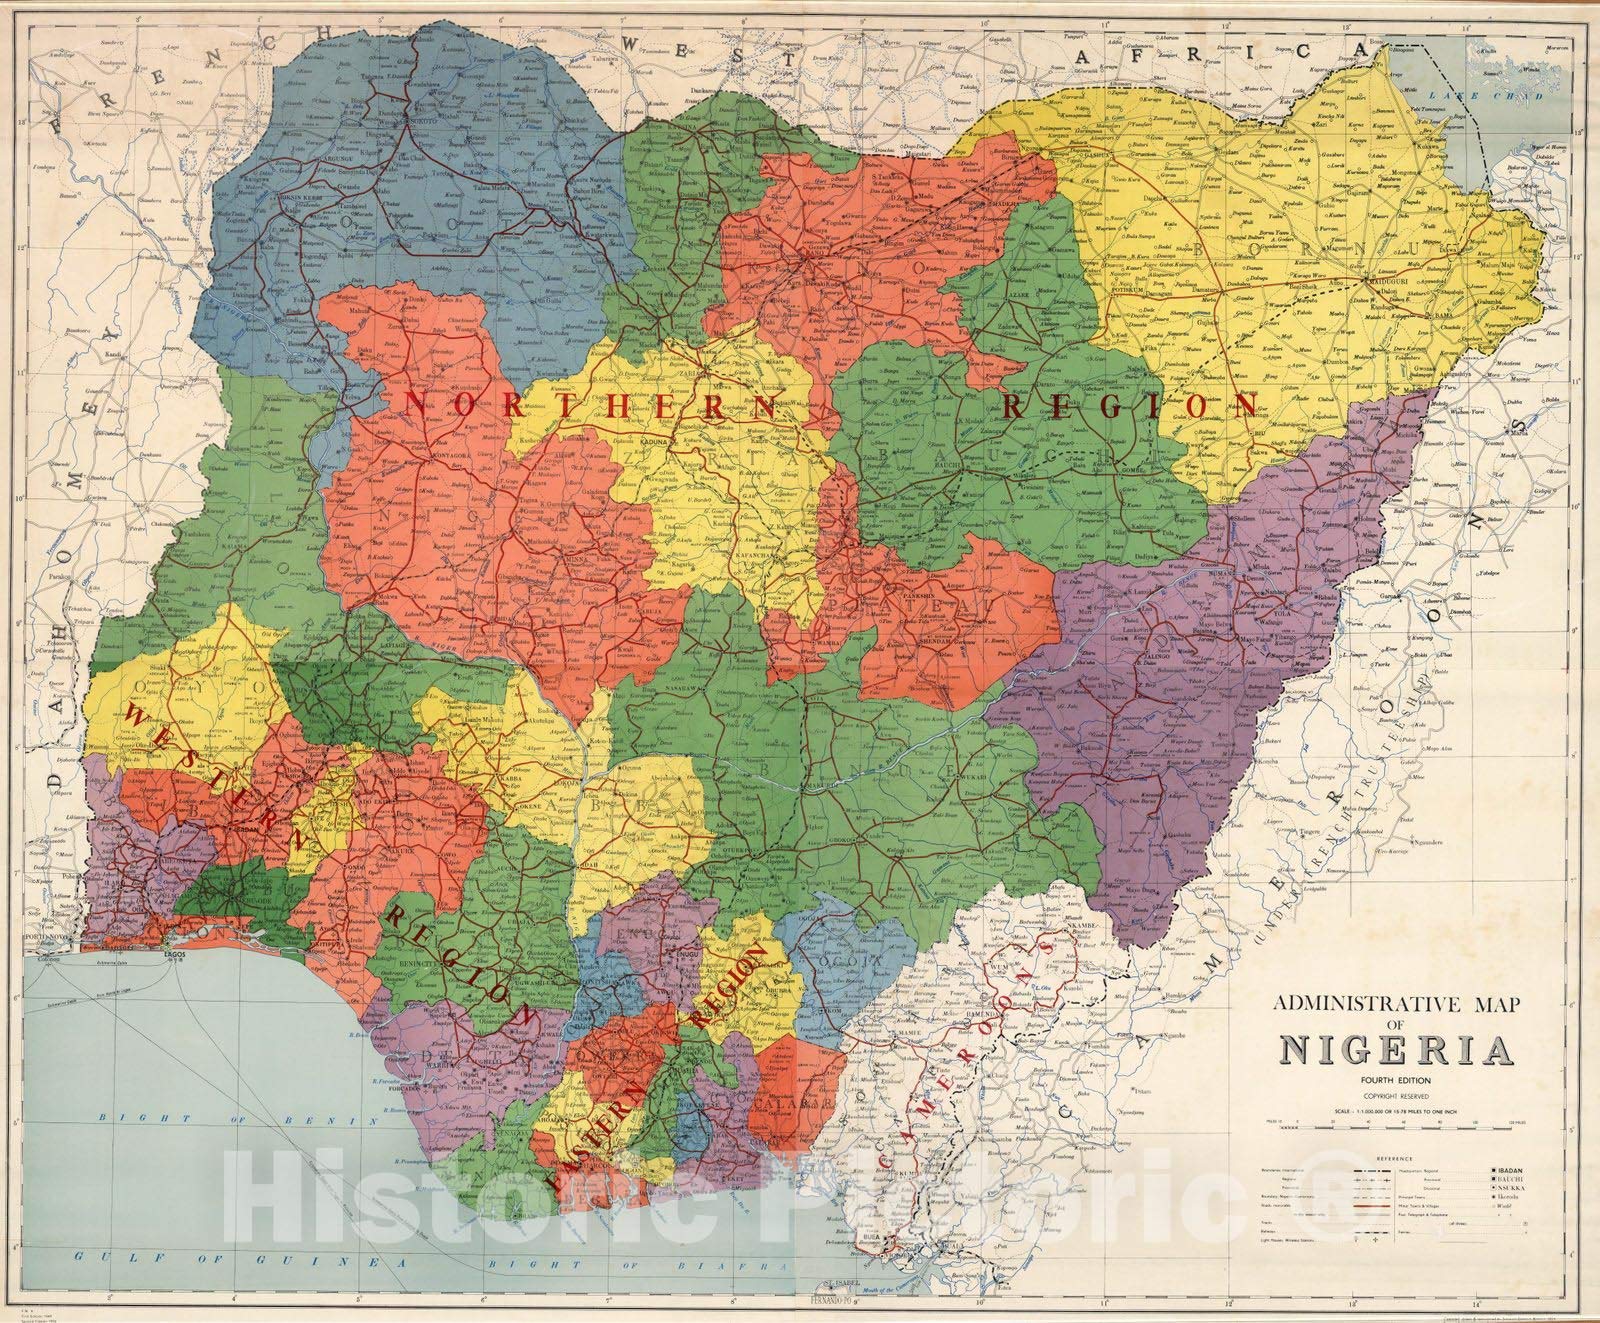 Old map of Nigeria